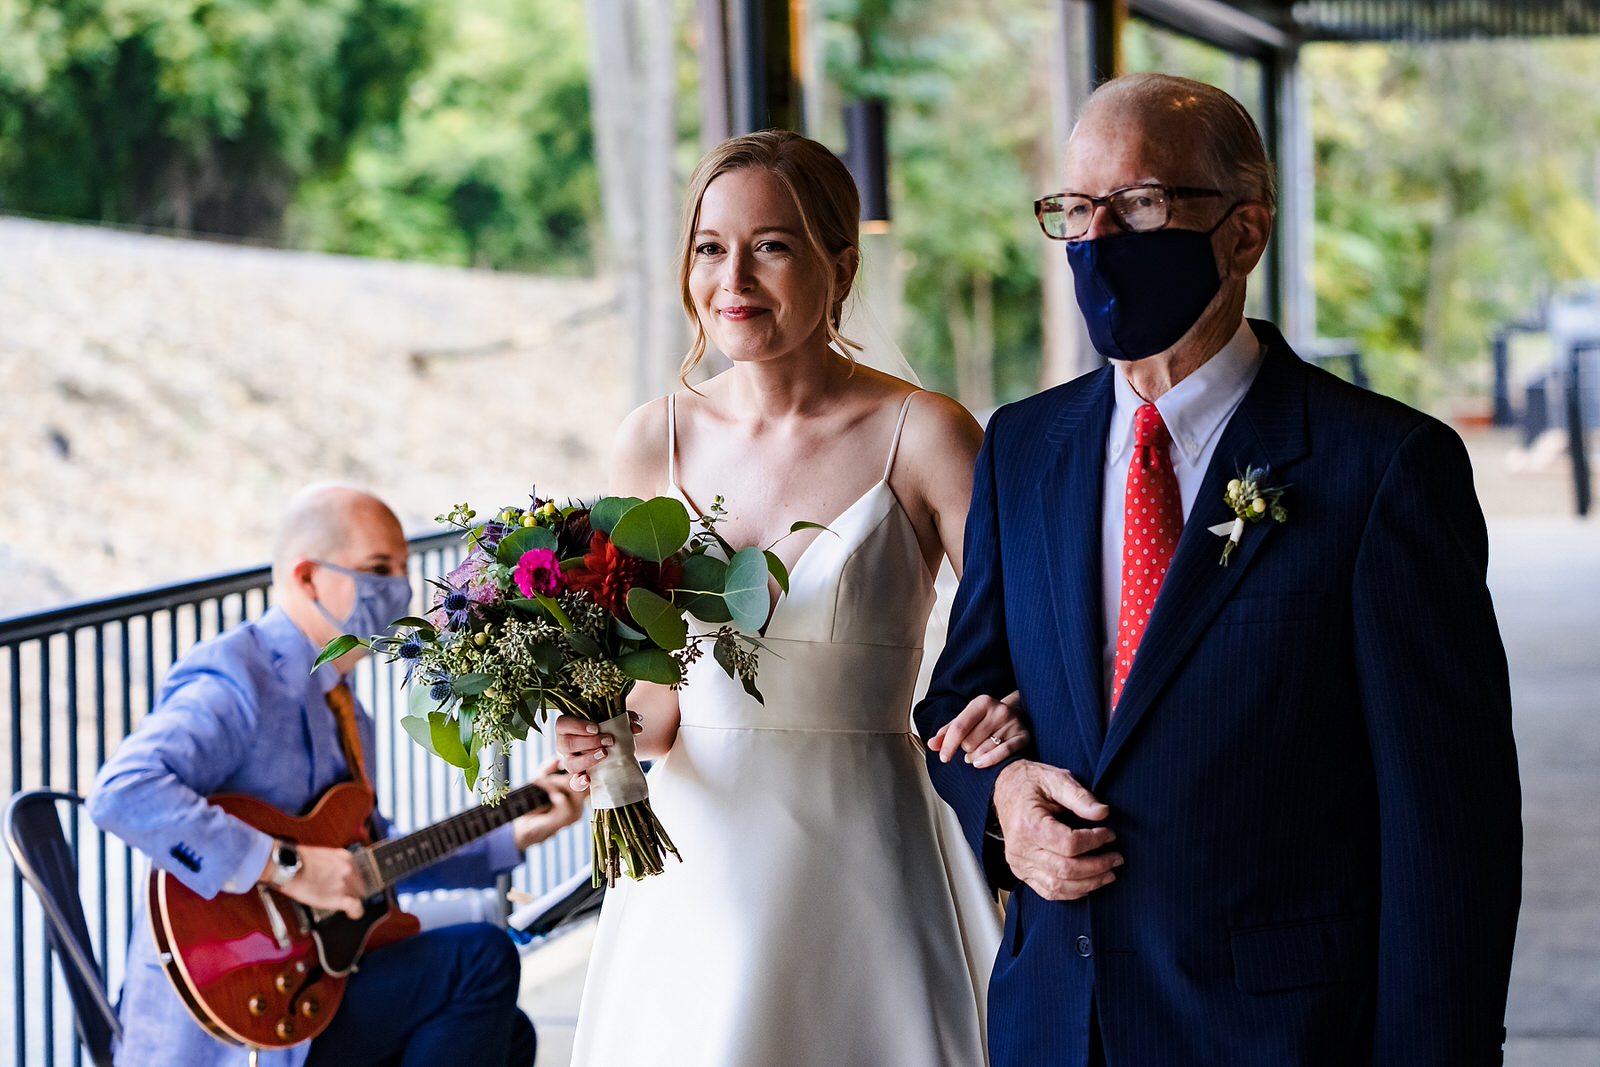 Father of the bride wears a mask as he walks her down the aisle